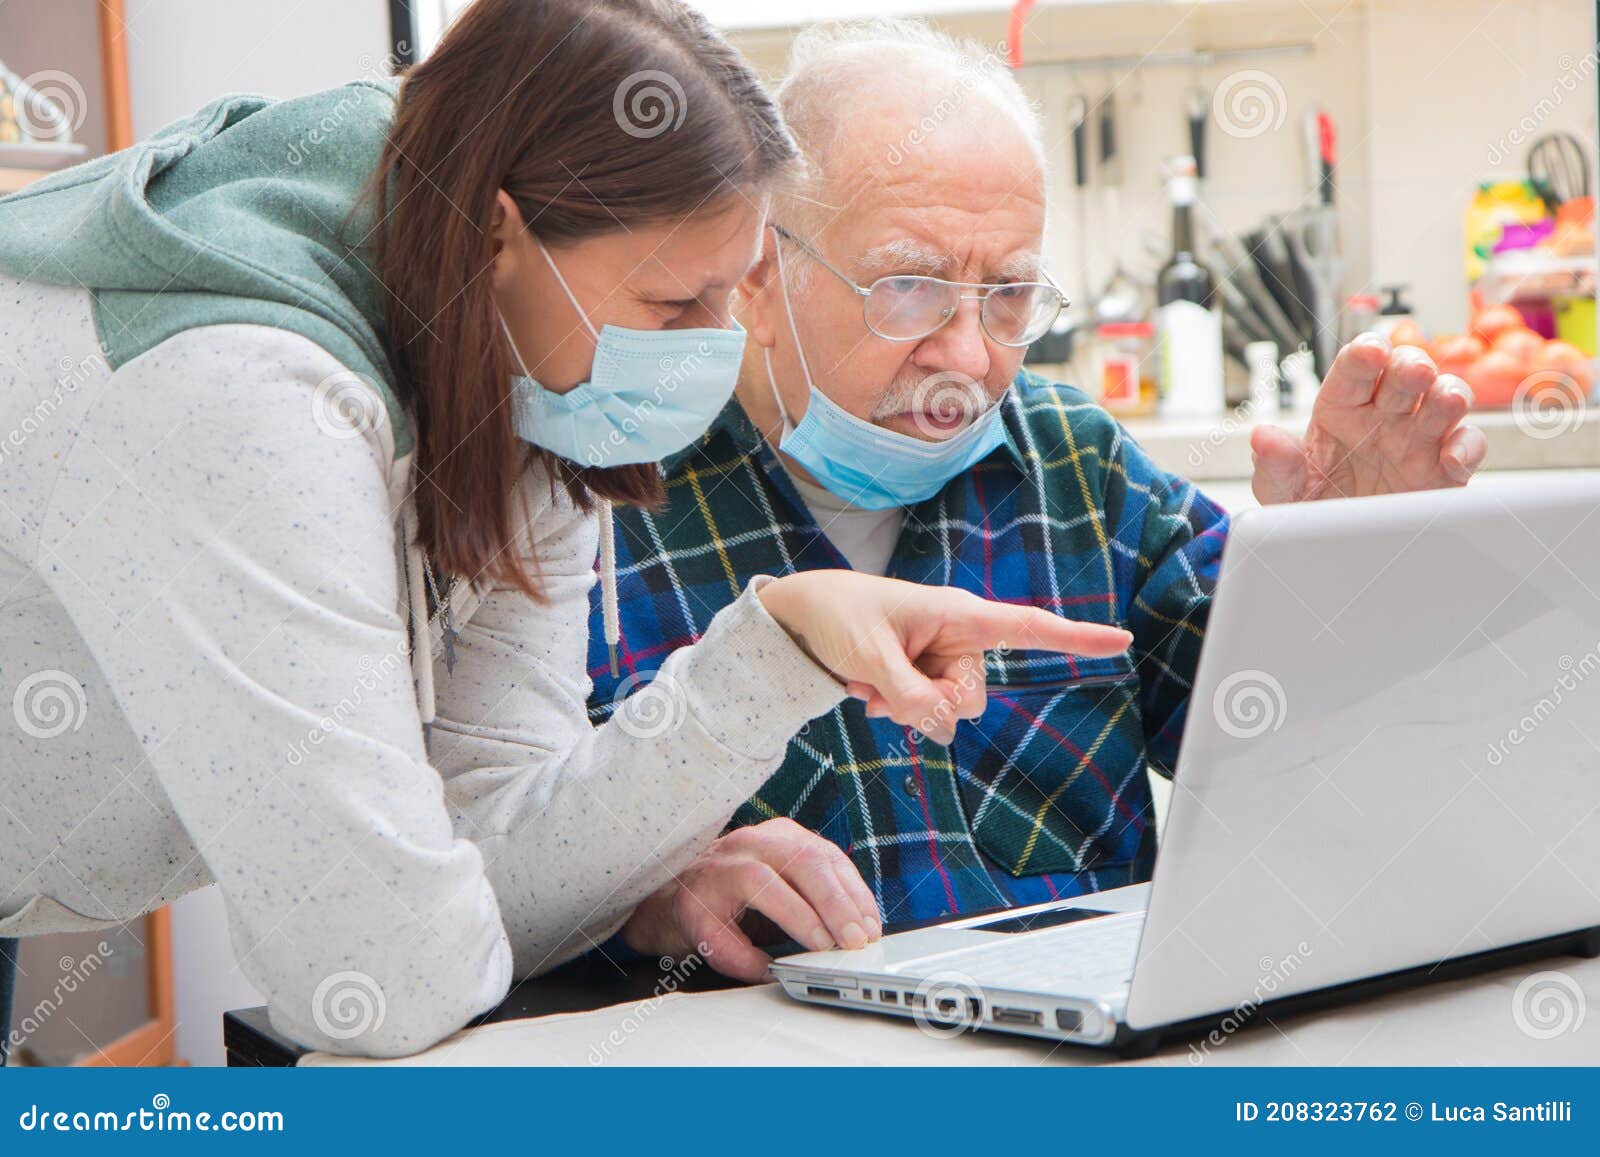 senior man is helped by his caregiver to using laptop at home during coronavirus pandemia